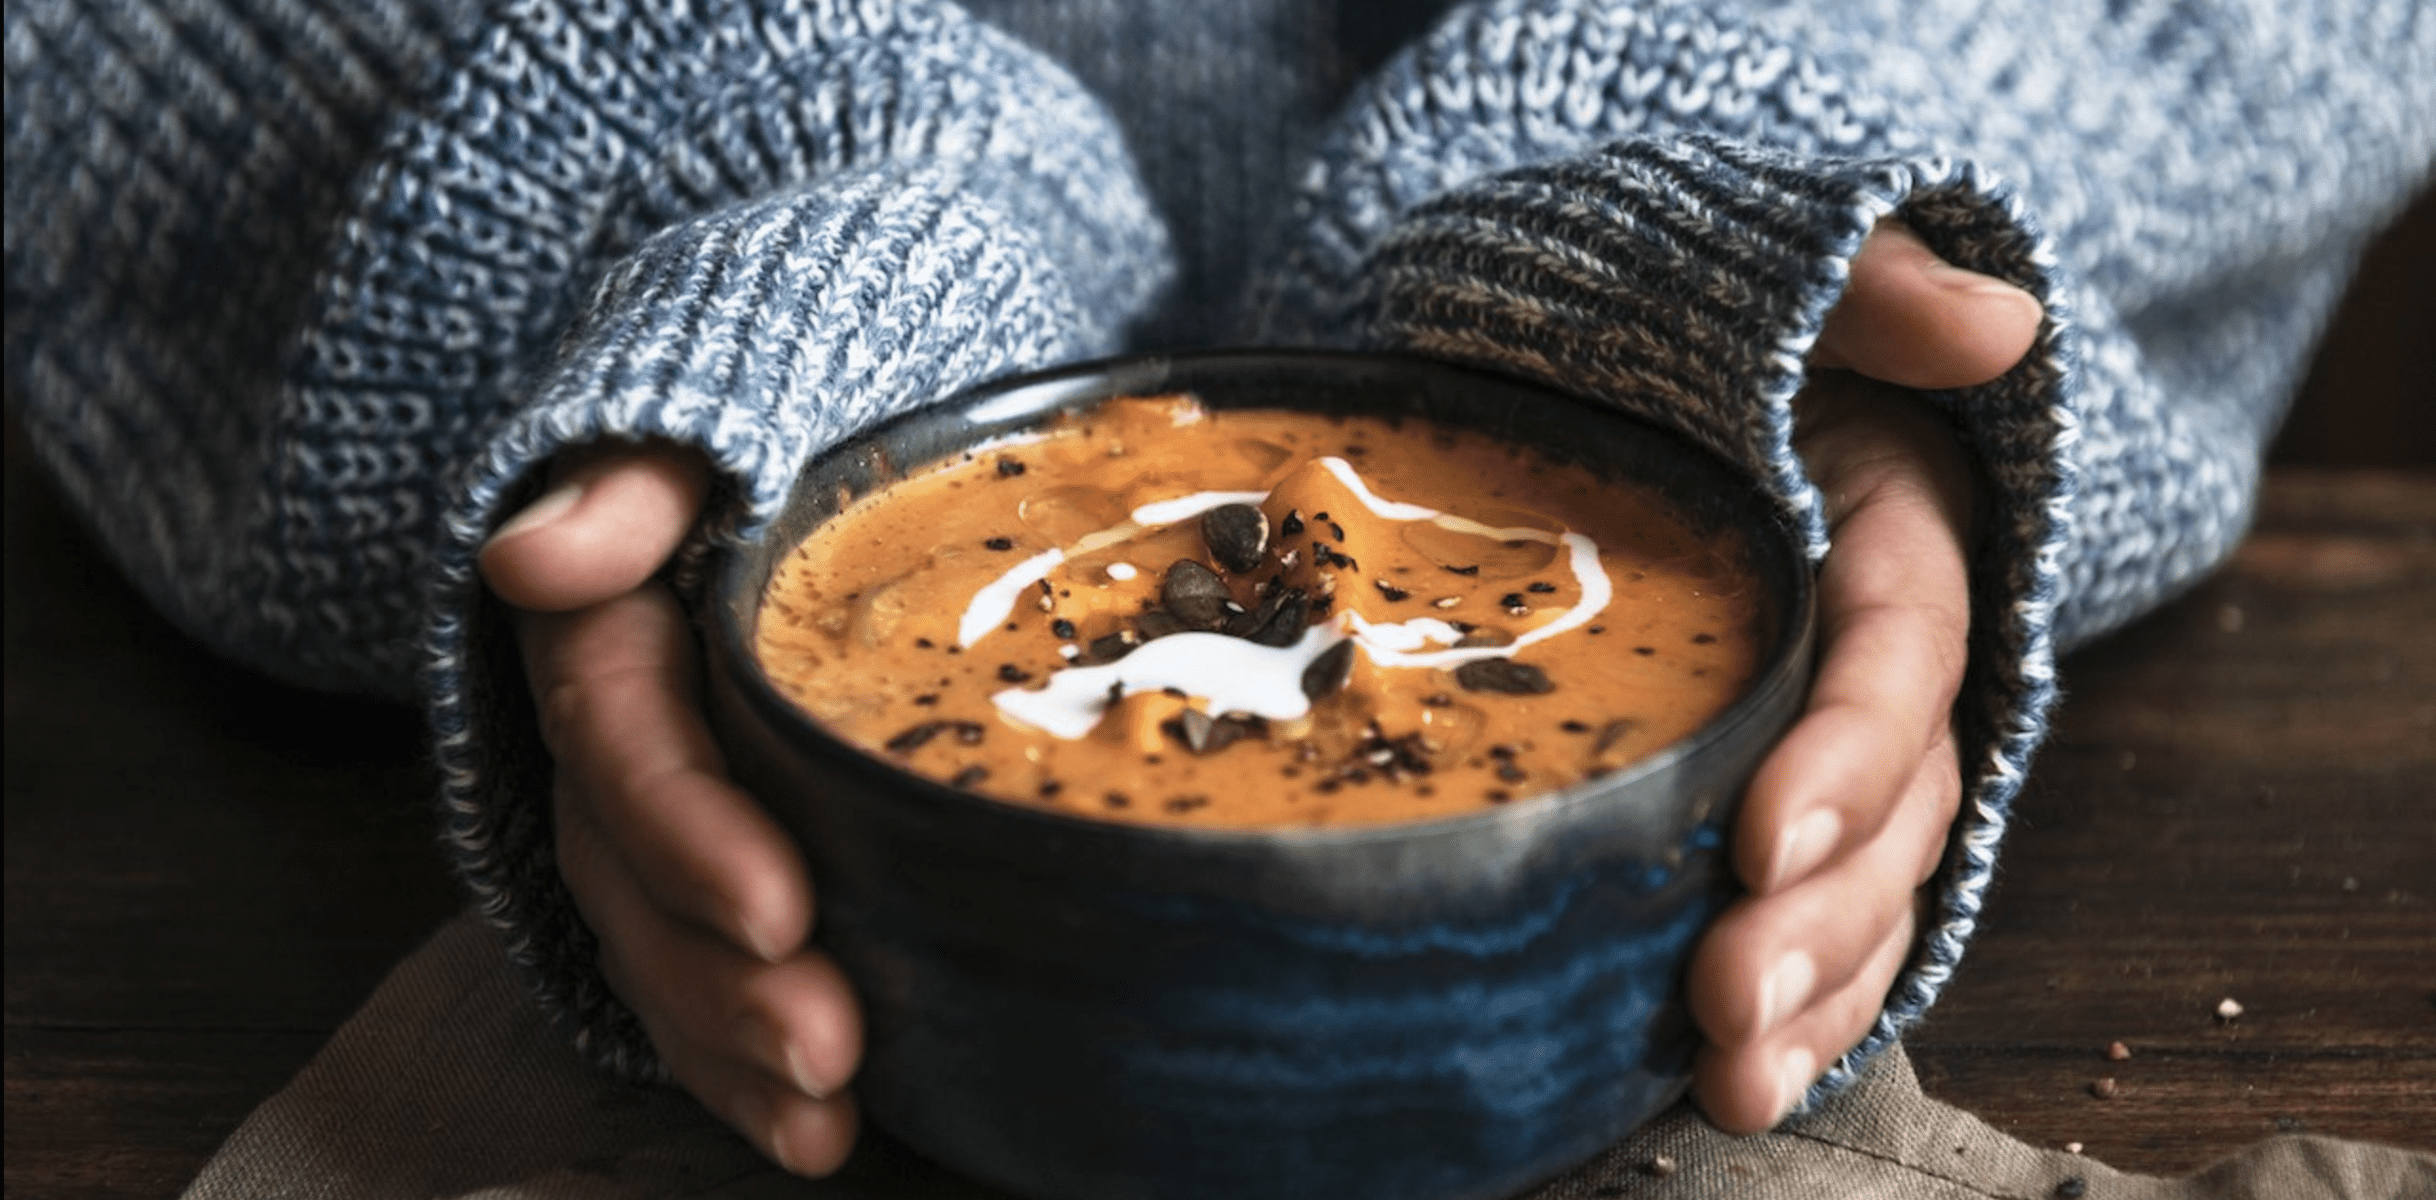 A woman wearing a cozy, blue sweater holds a bowl of soup